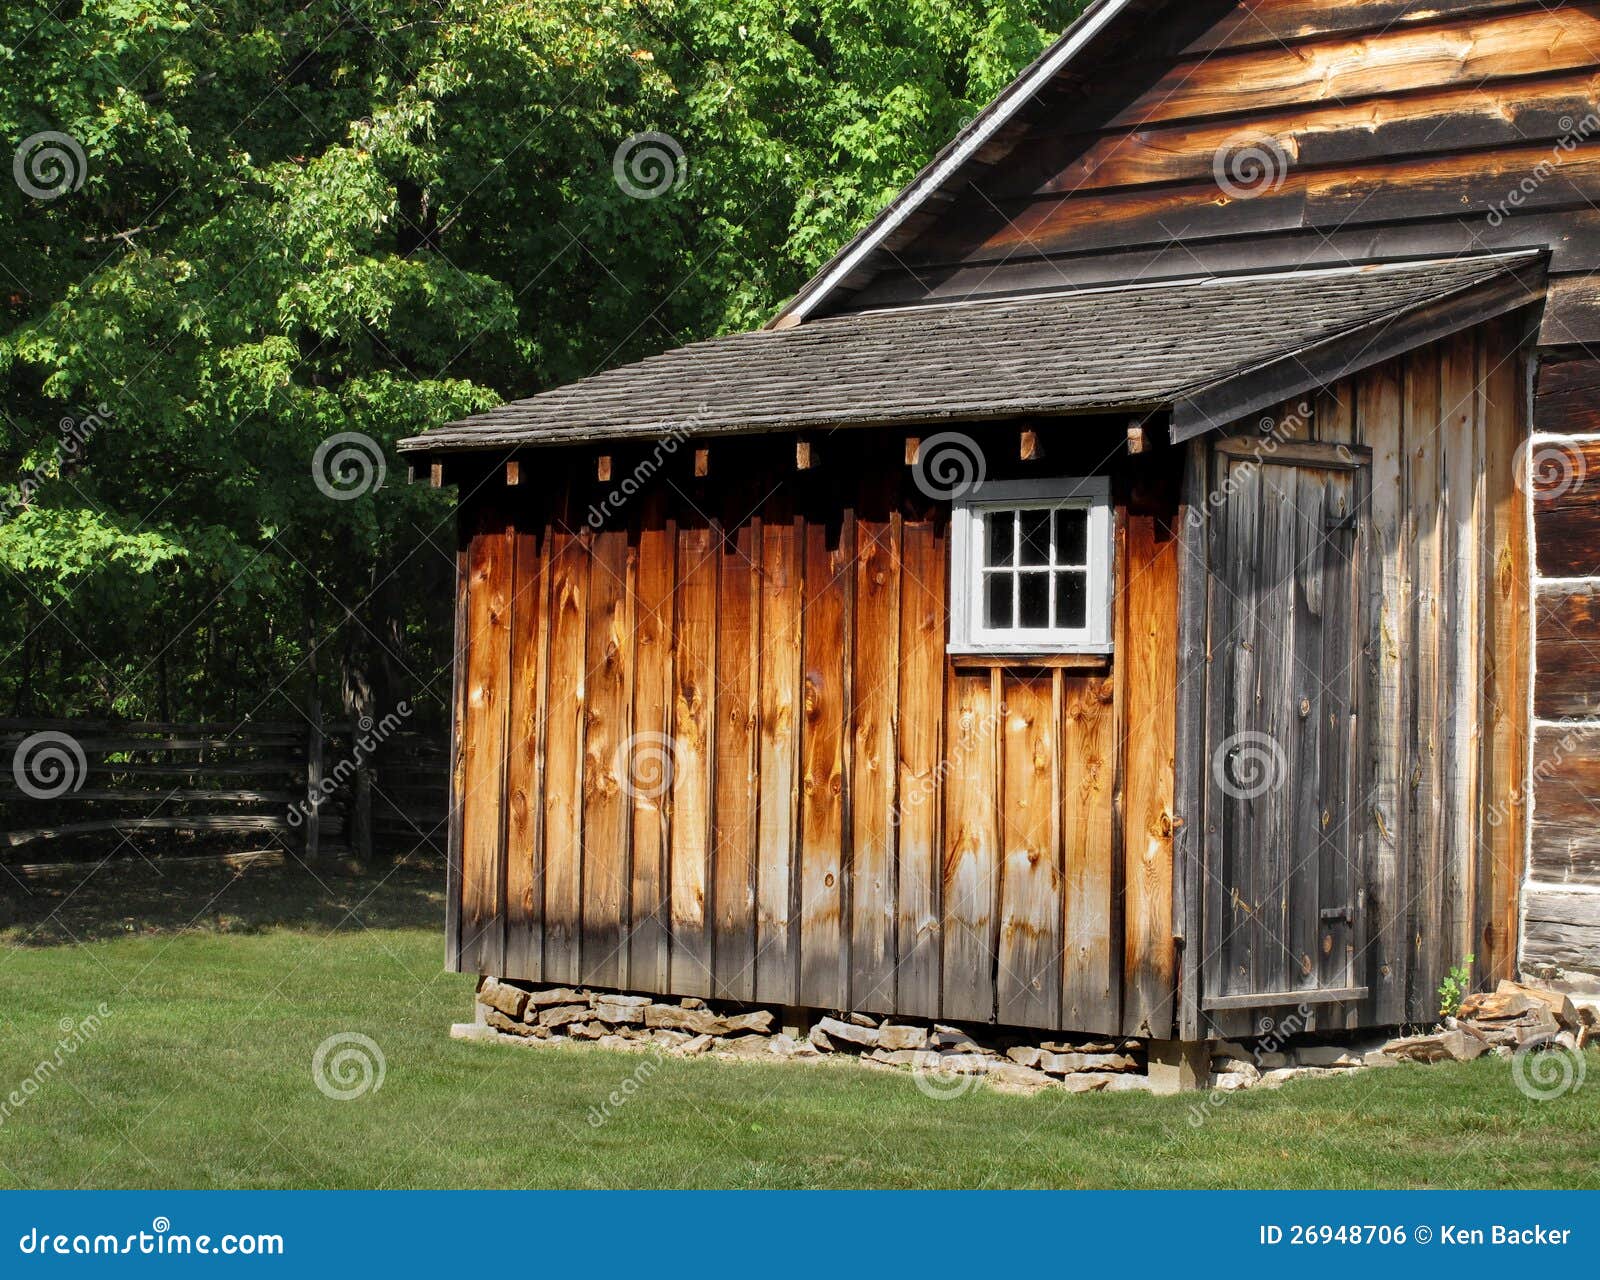 Rustic backyard wooden shed with a window and door, attached to ...